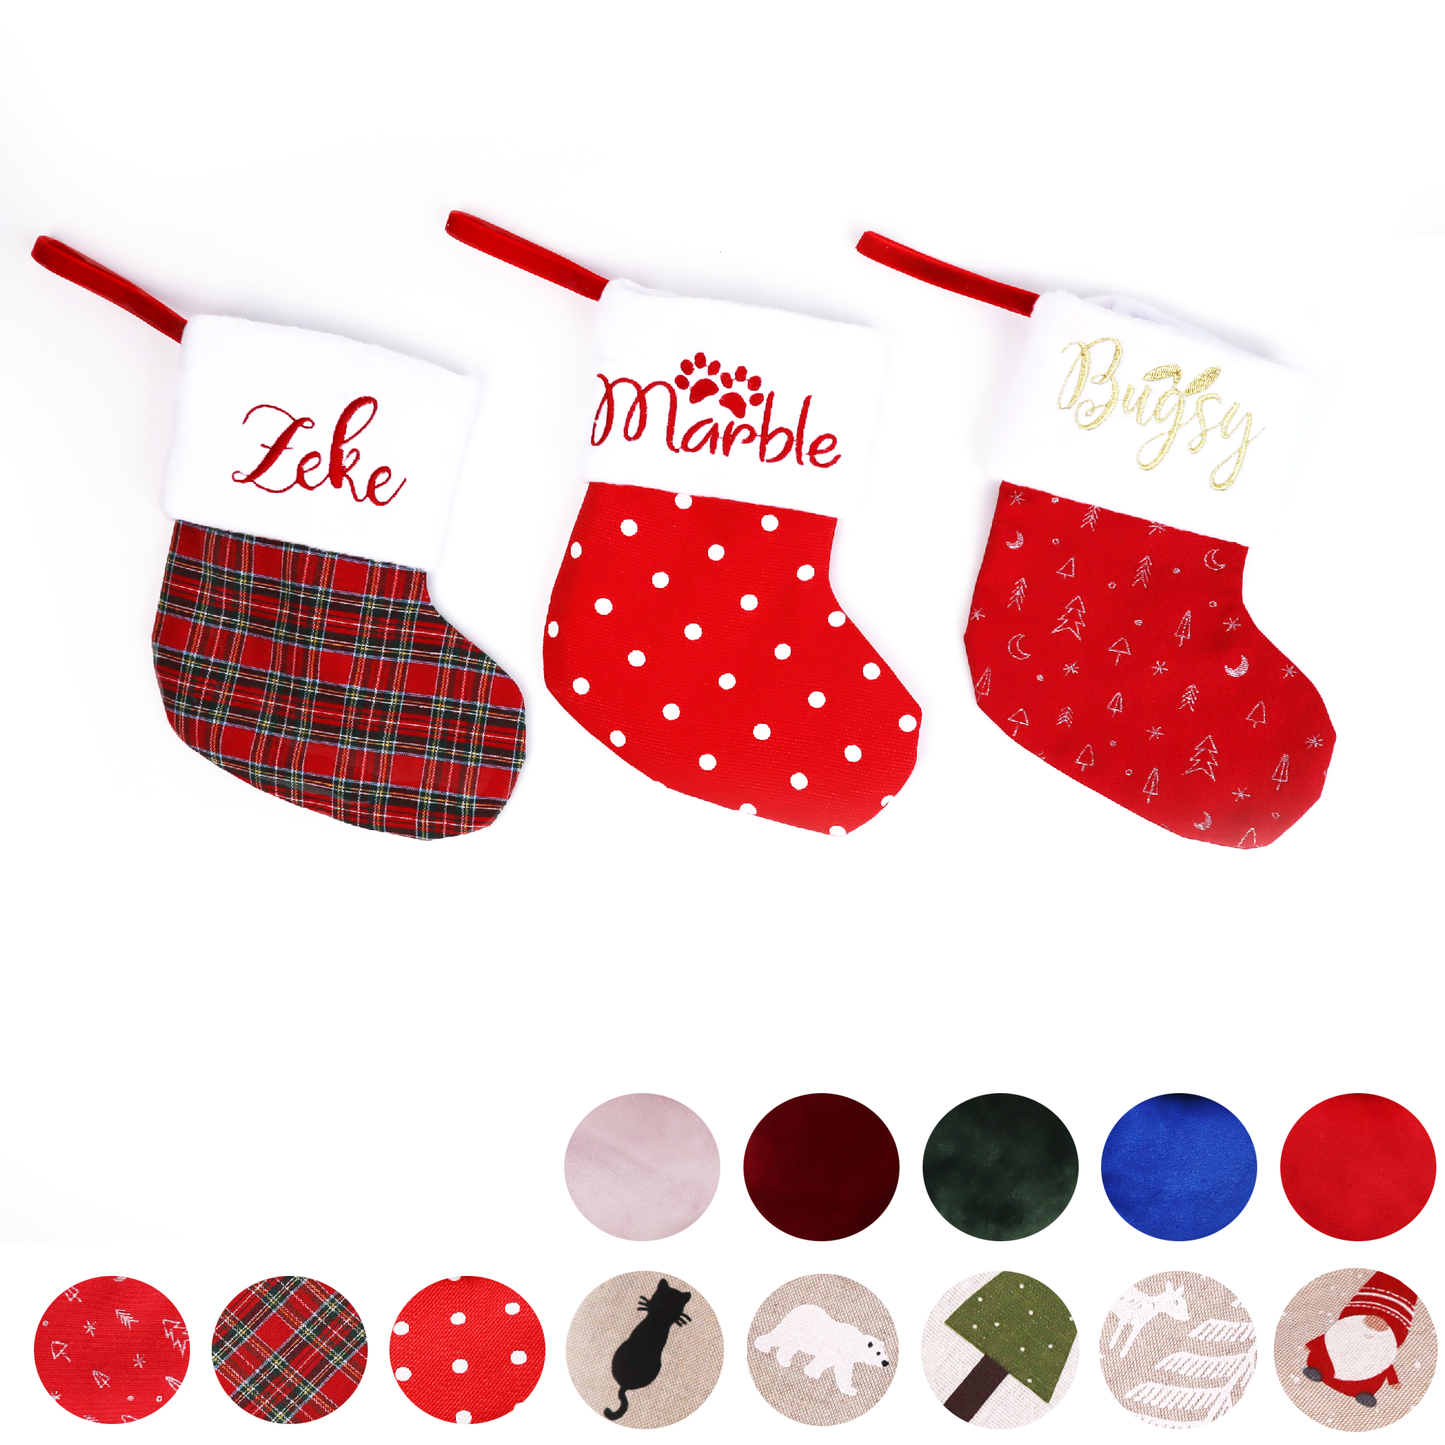 Baby First Christmas Stocking Small Personalized Stocking (Plaid)